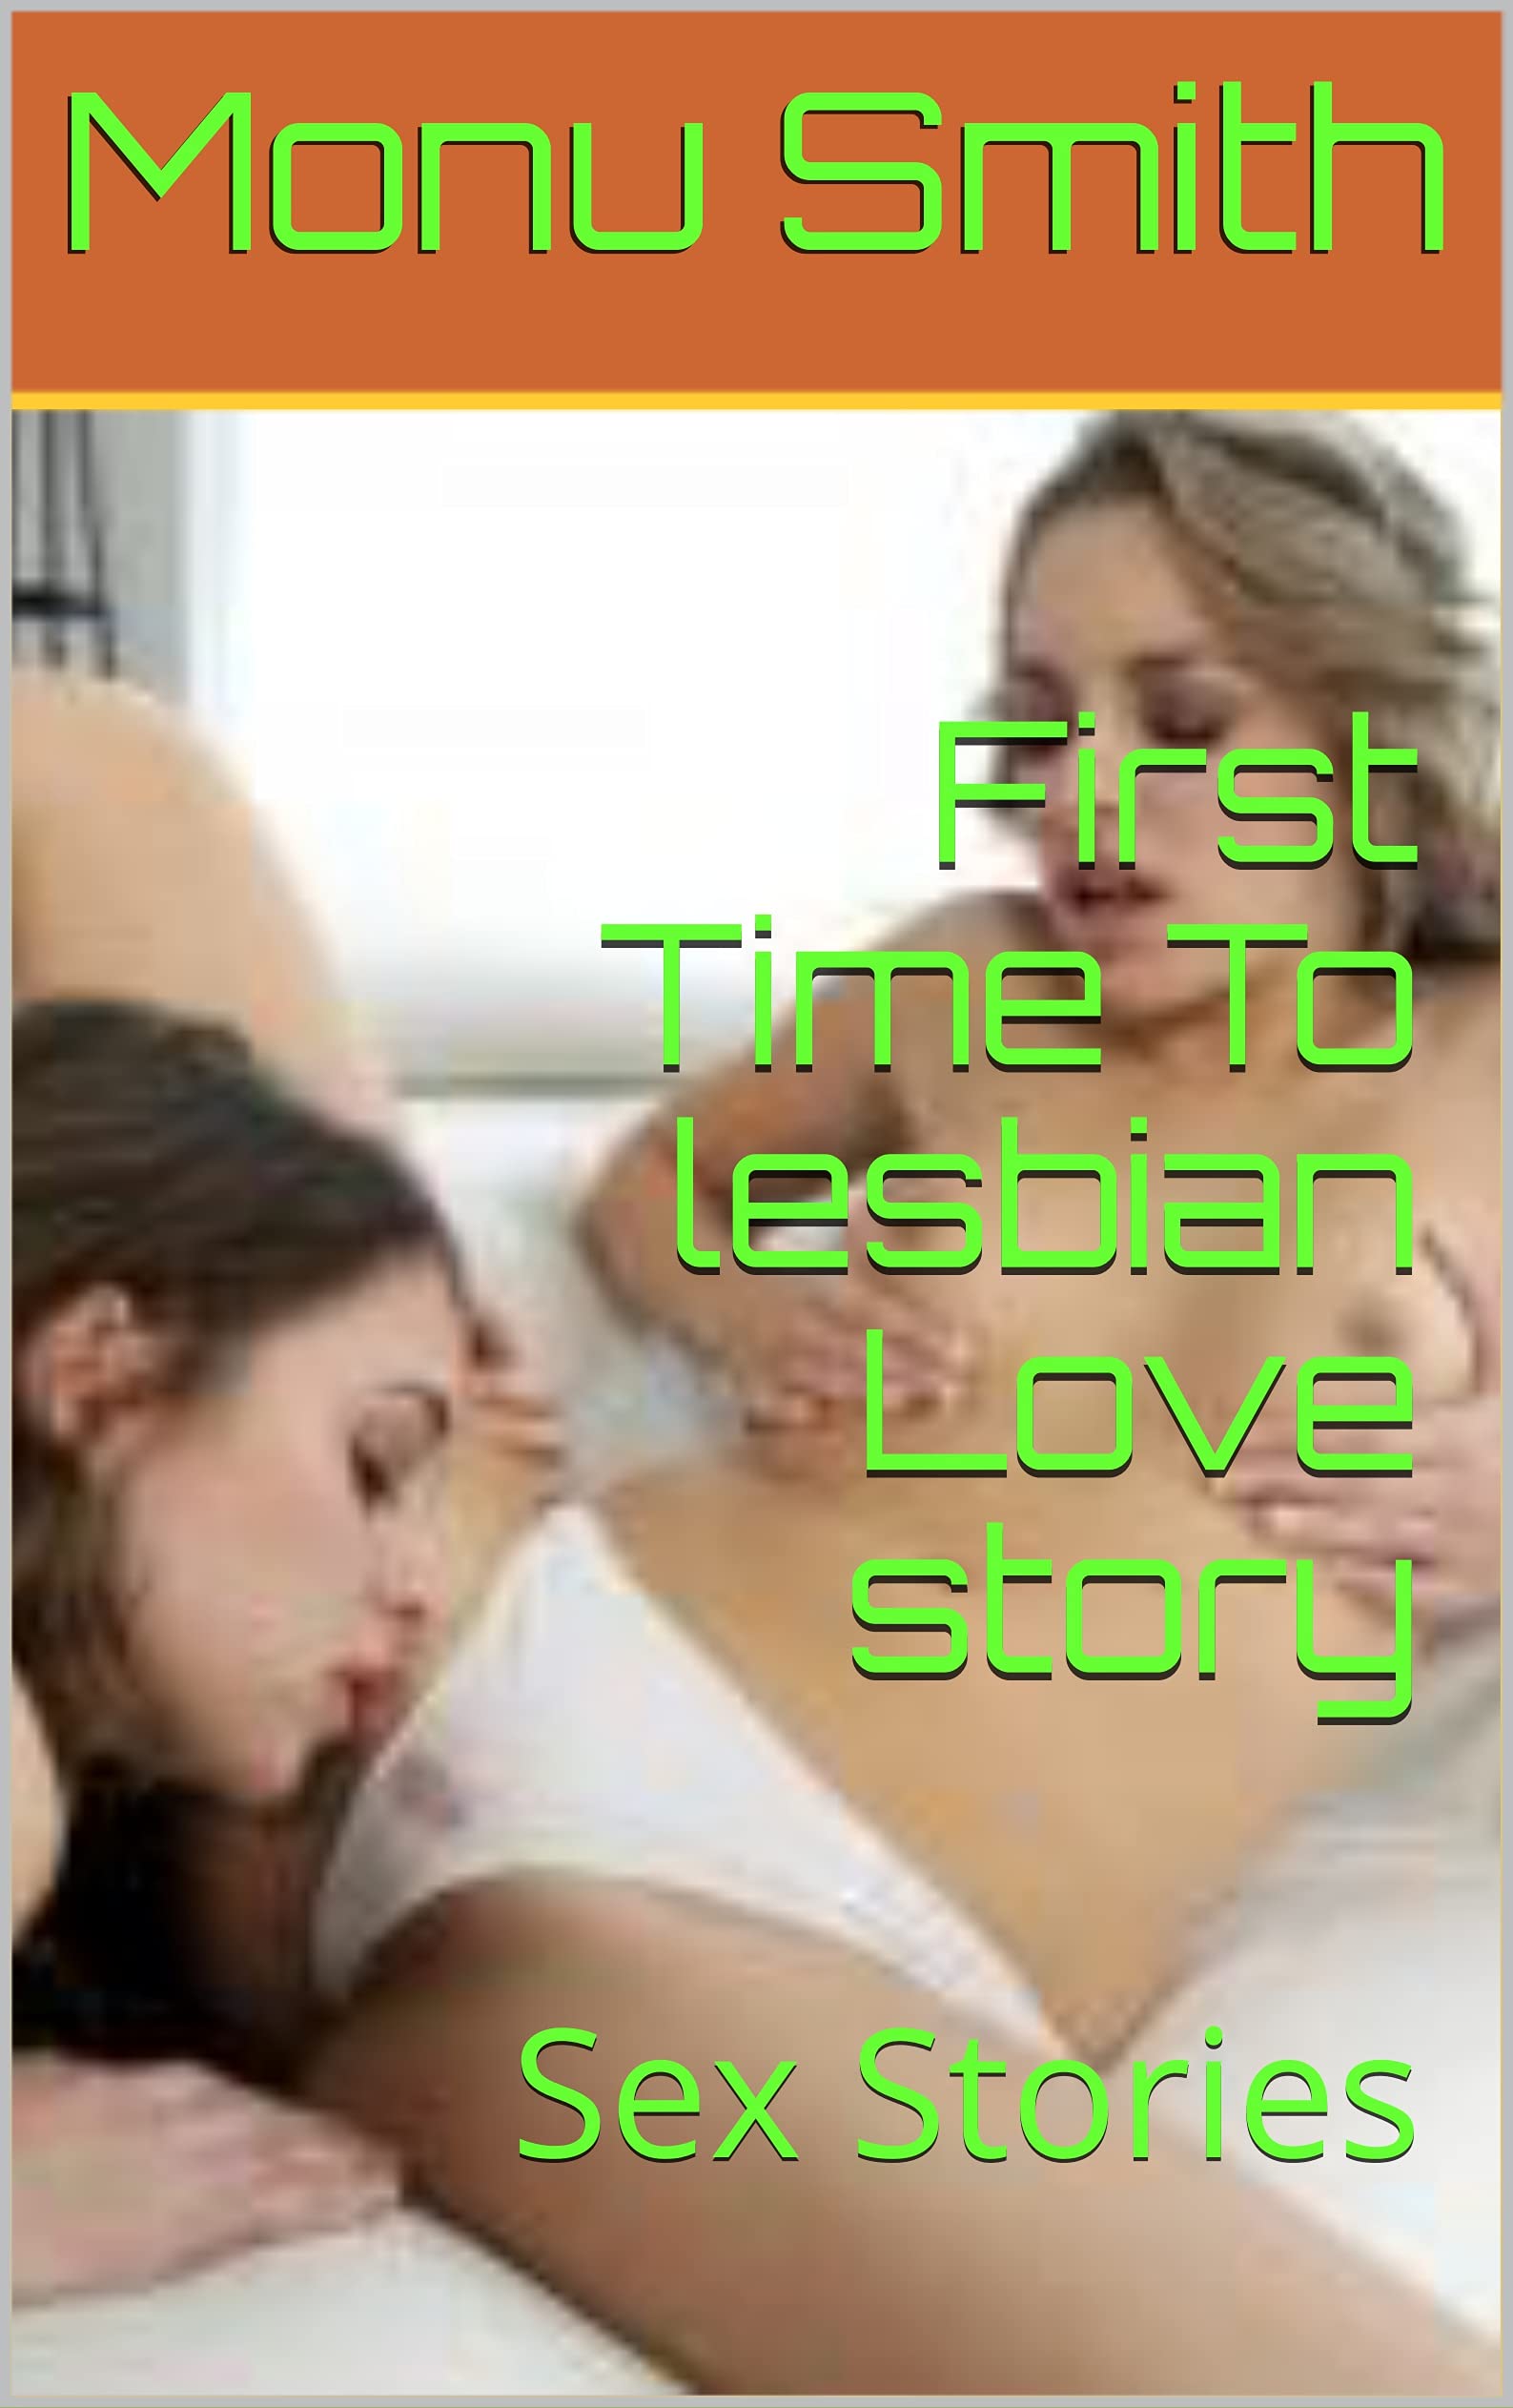 andrew westcott recommends First Time Seduction Stories